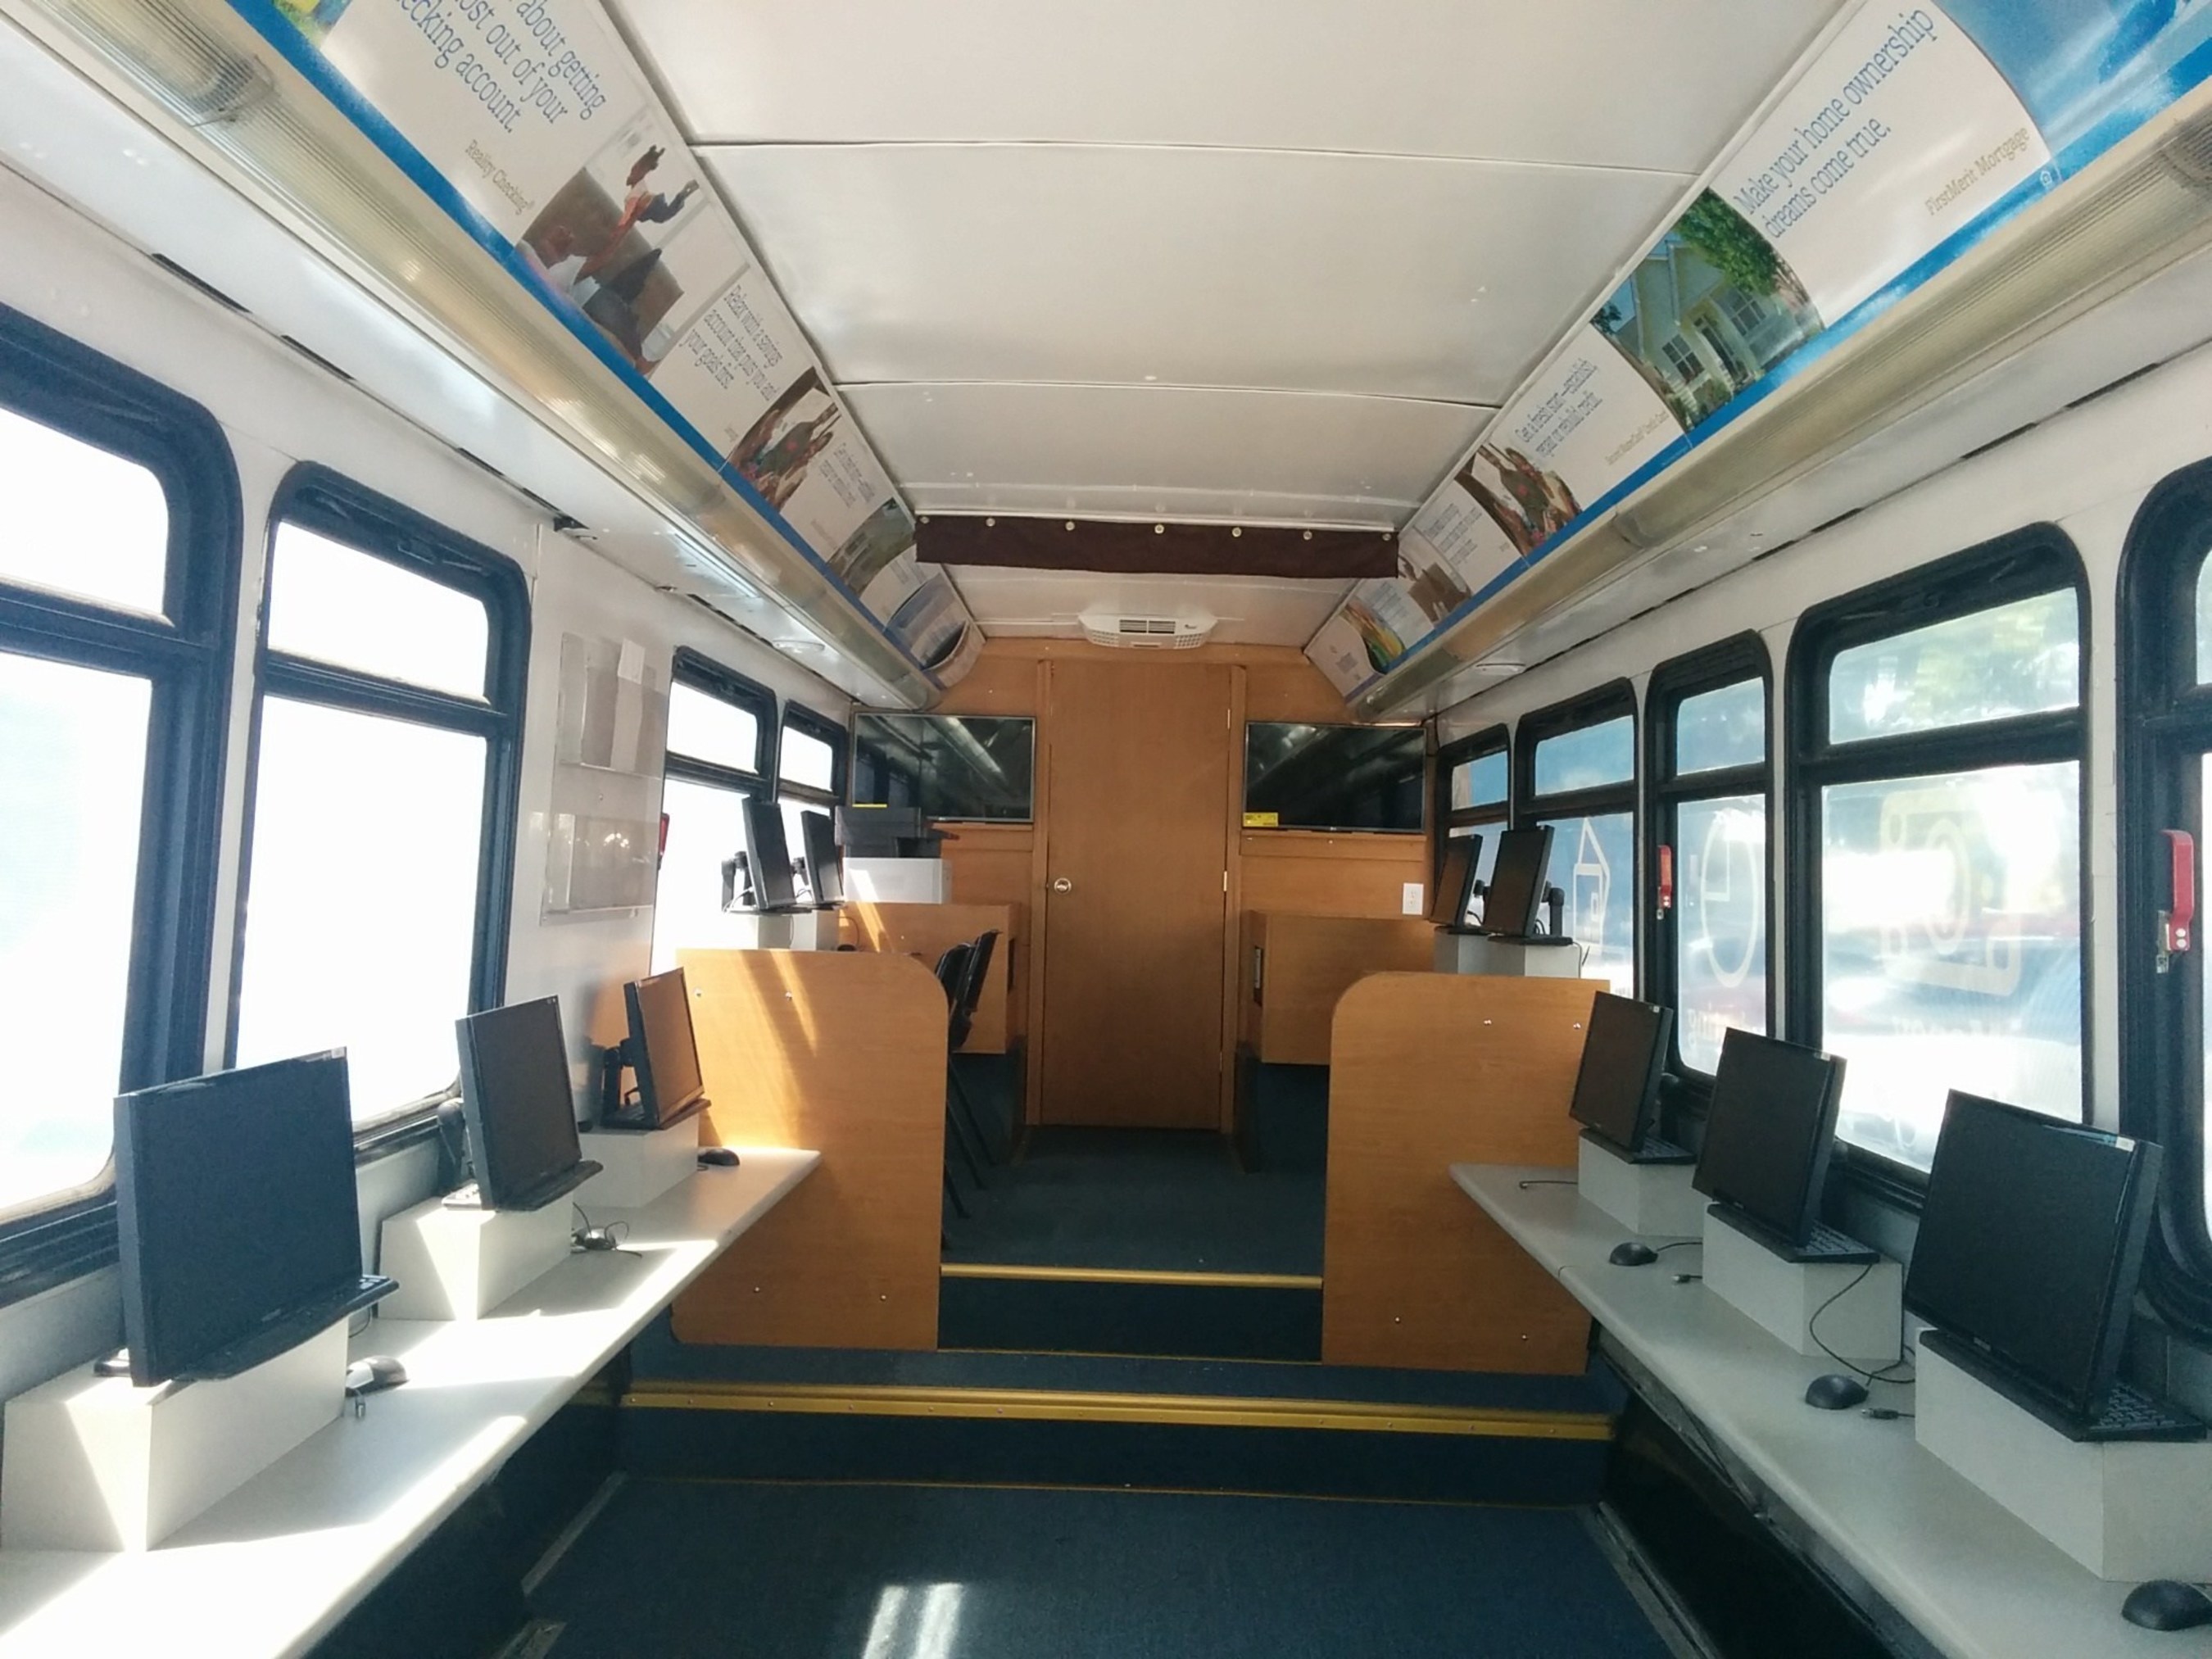 The interior of FirstMerit's Mobile Financial Learning Center is equipped with computer workspaces and other resources for teaching individuals how to take control of their financial future.